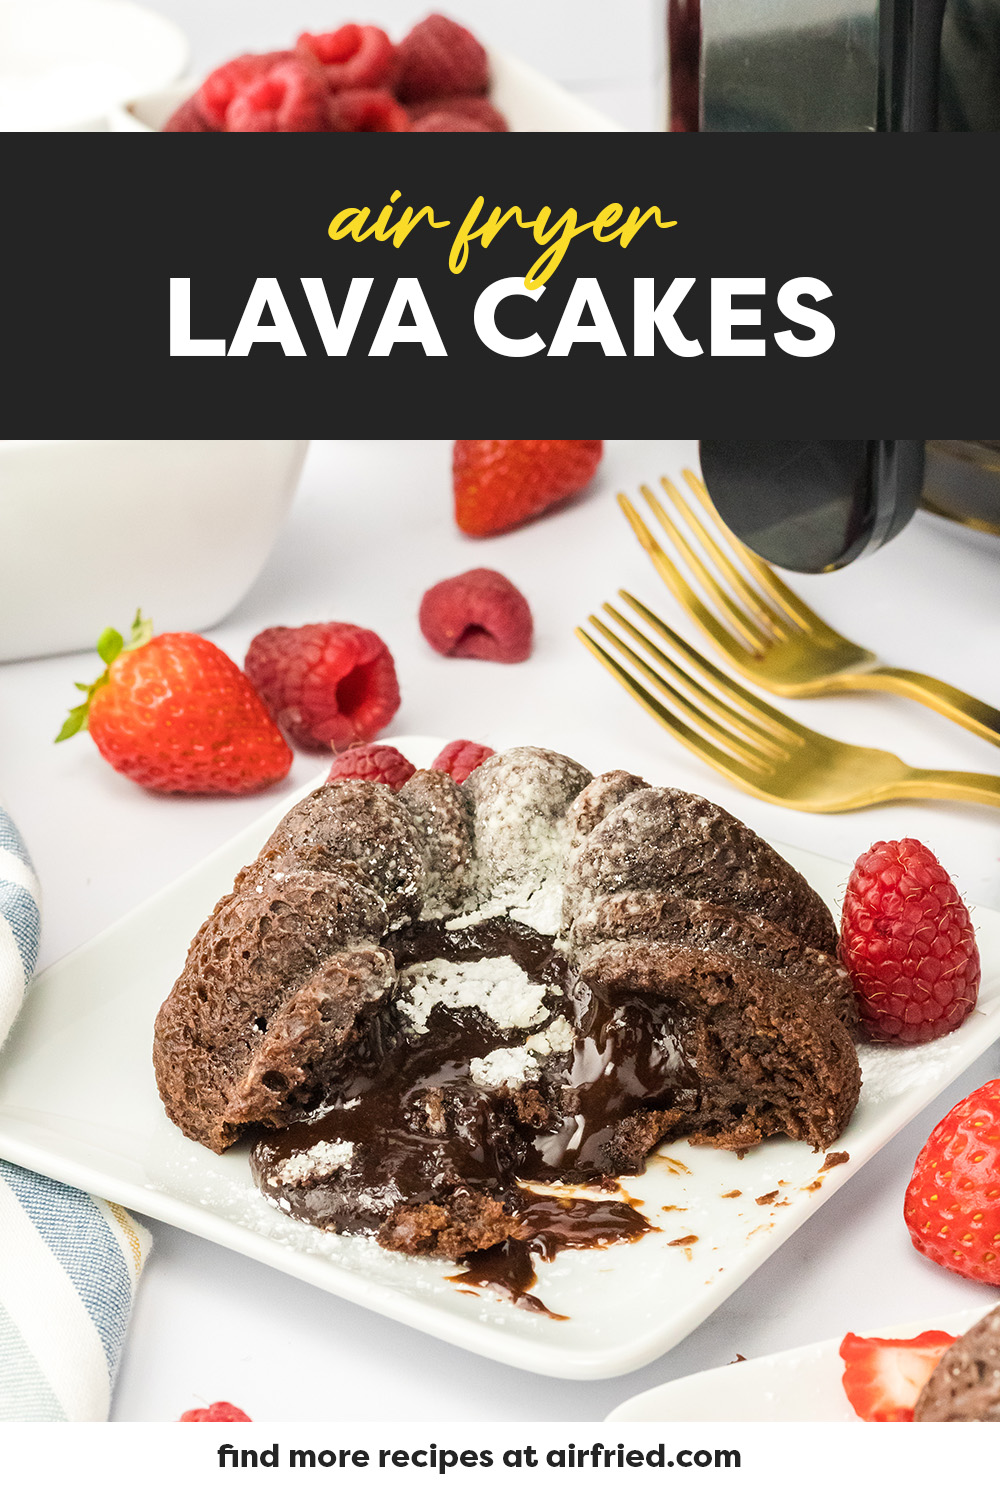 These air fried lava cakes are simple perfection!  This is a go-to desert on my next date night!
